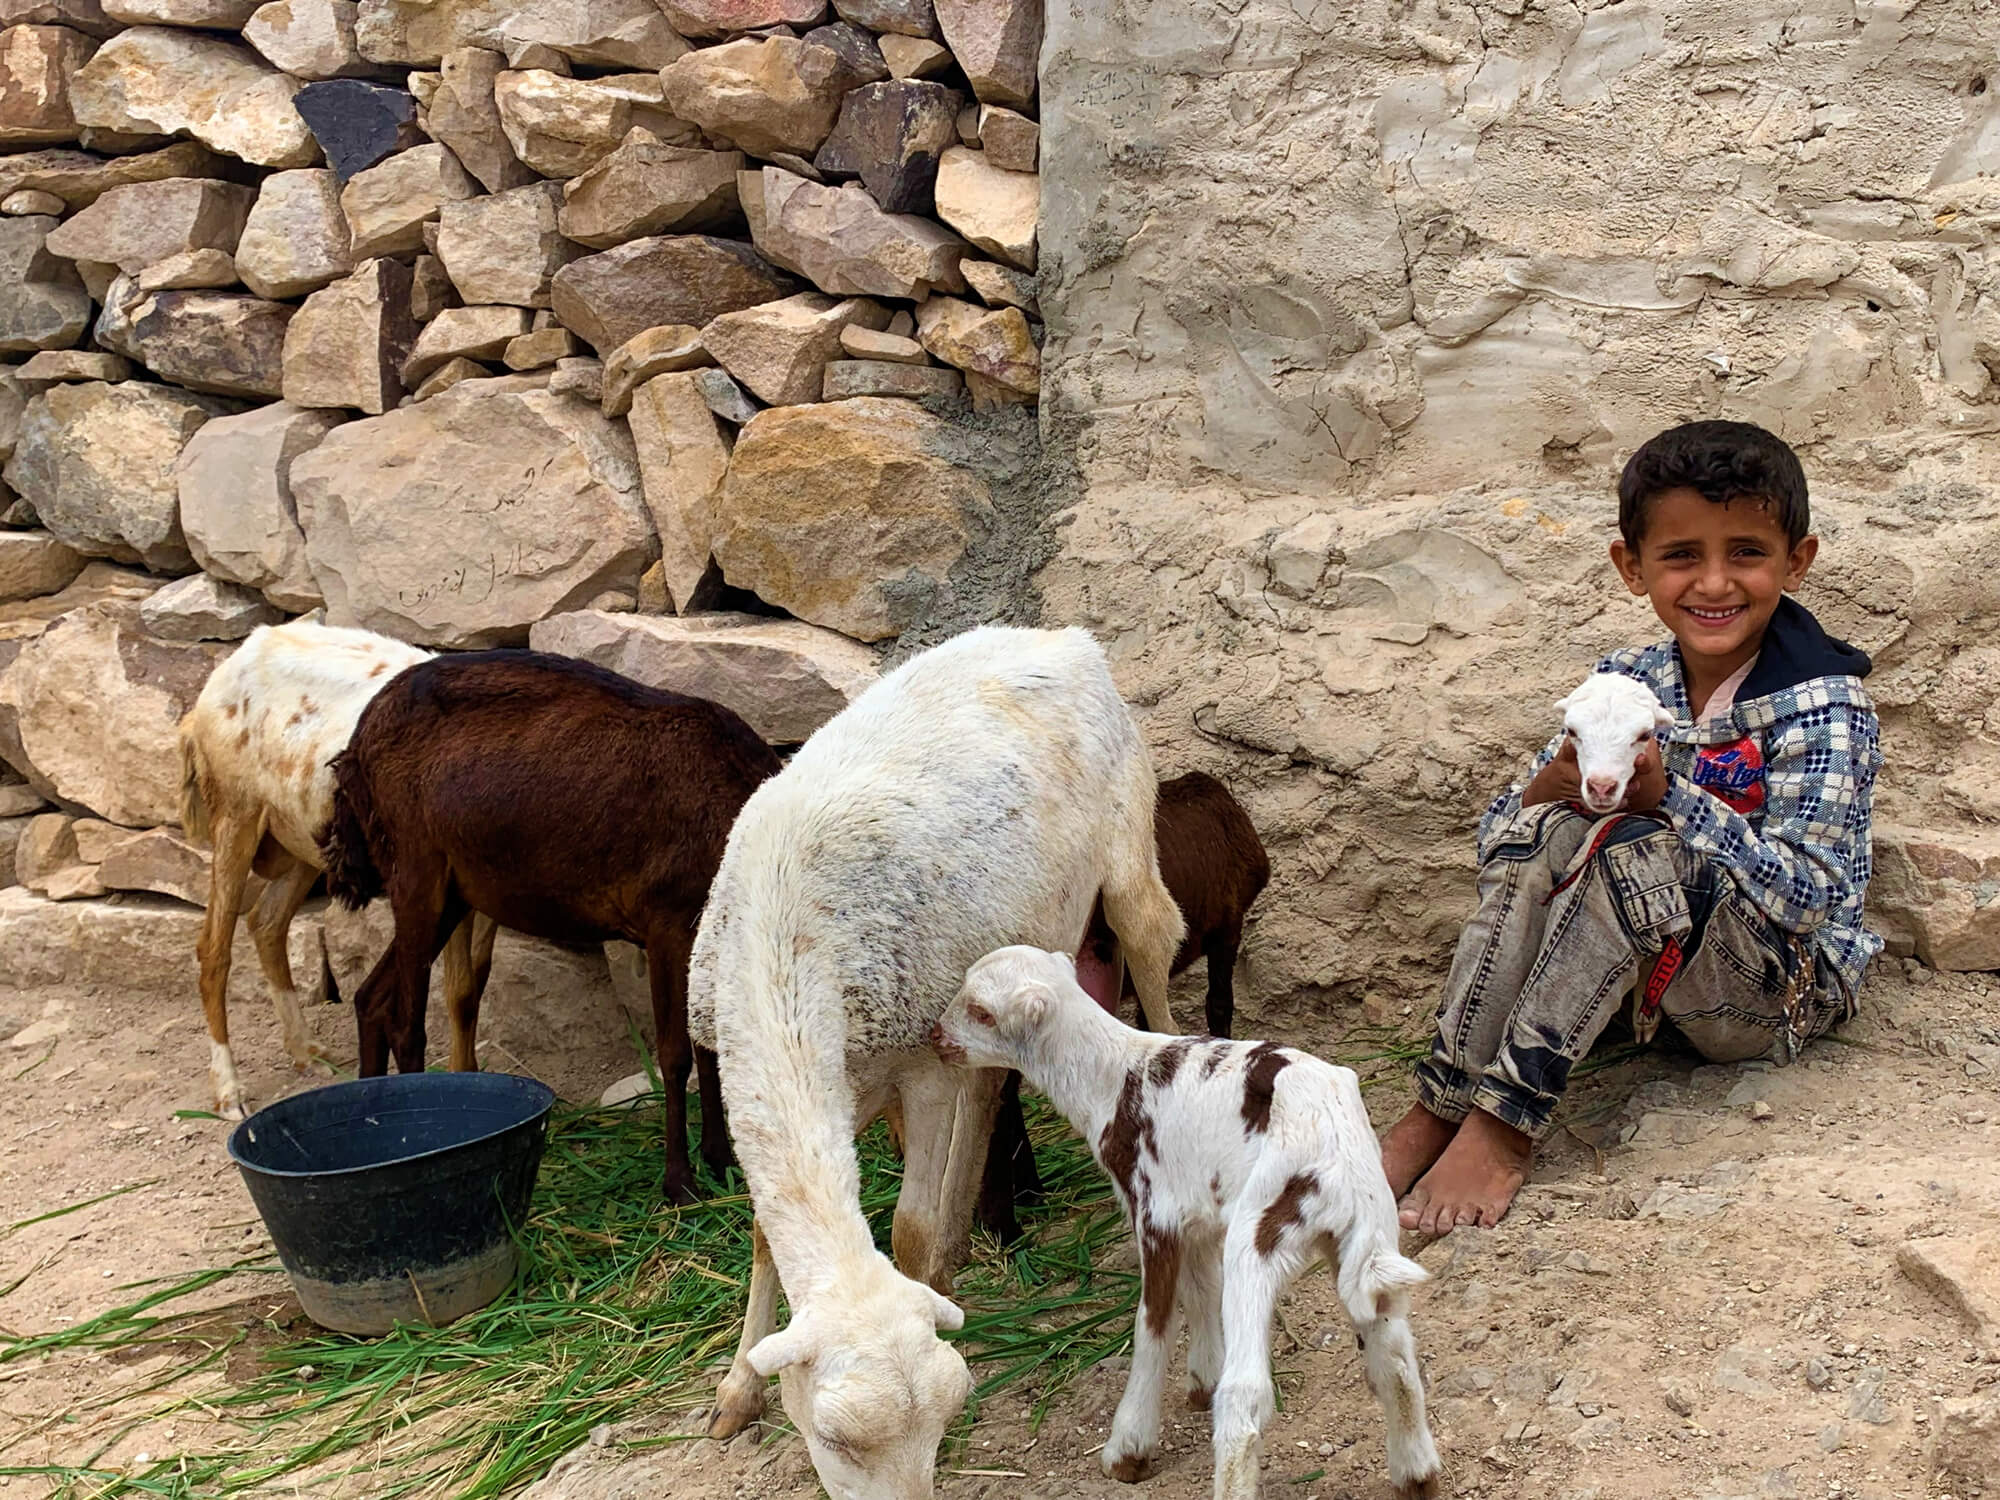 International Medical Corps’ Food Security and Livelihoods team in Yemen provided Abduljabbar Ahmed and his family with three female sheep. Here, Abduljabbar’s son Issa is shown holding one of the lambs born to the family’s new herd.